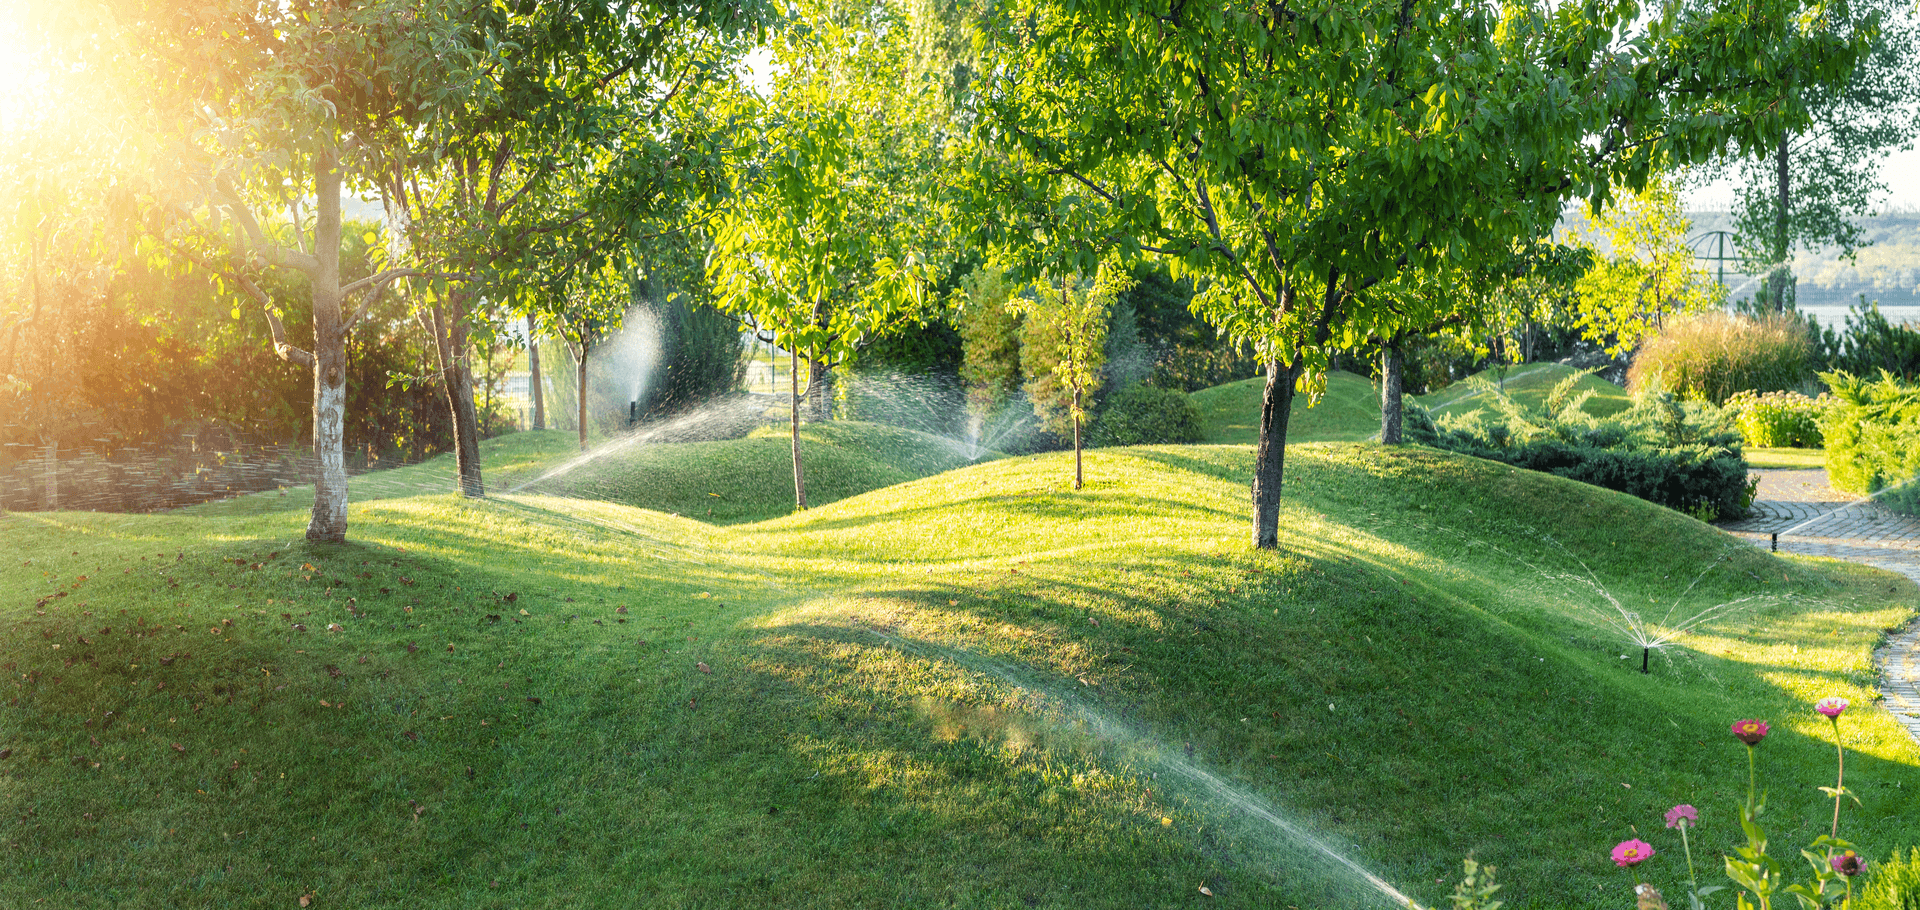 Irrigation management for the summer